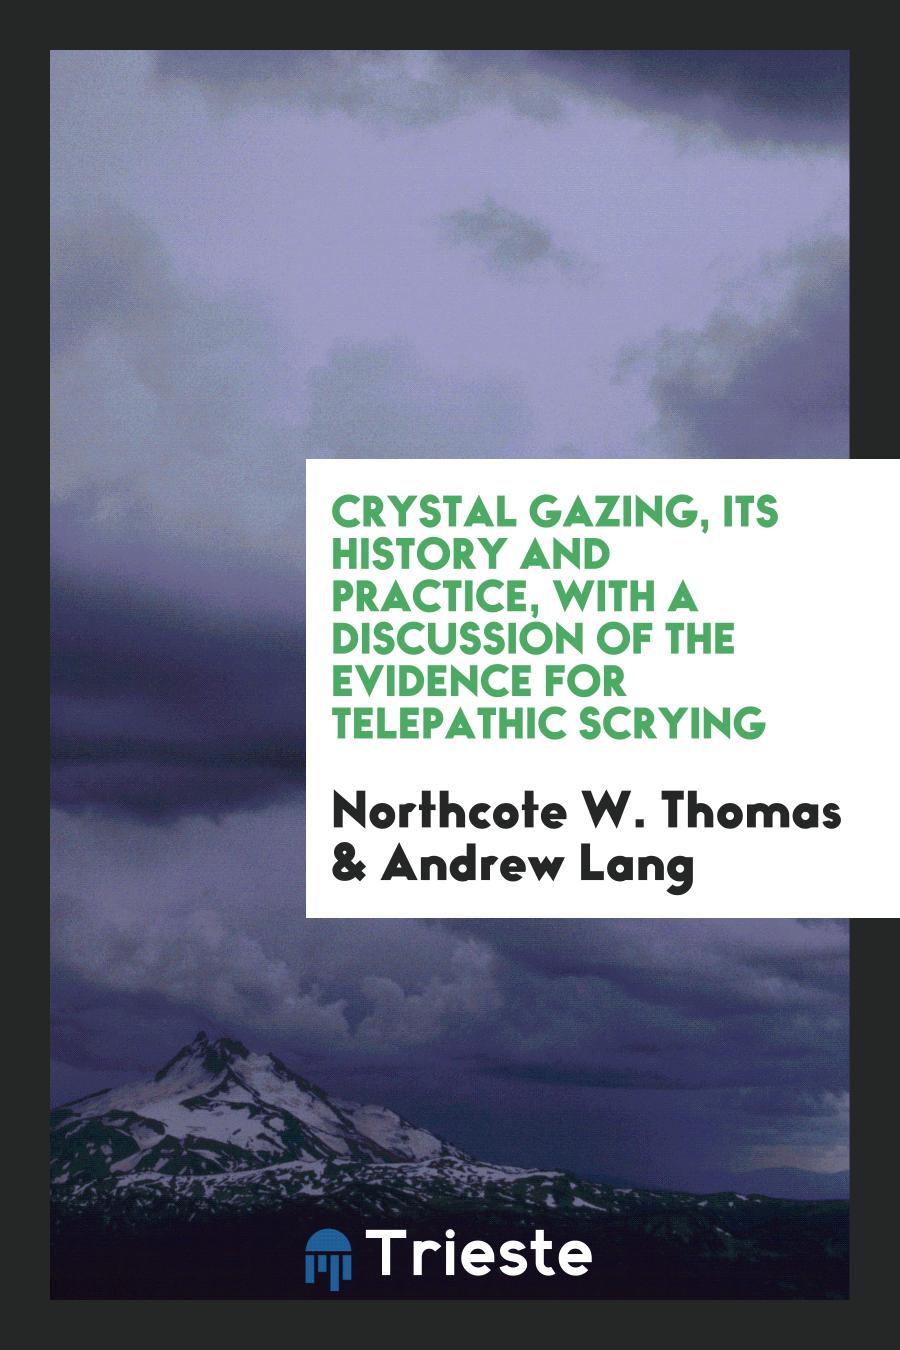 Crystal Gazing, Its History and Practice, with a Discussion of the Evidence for Telepathic Scrying